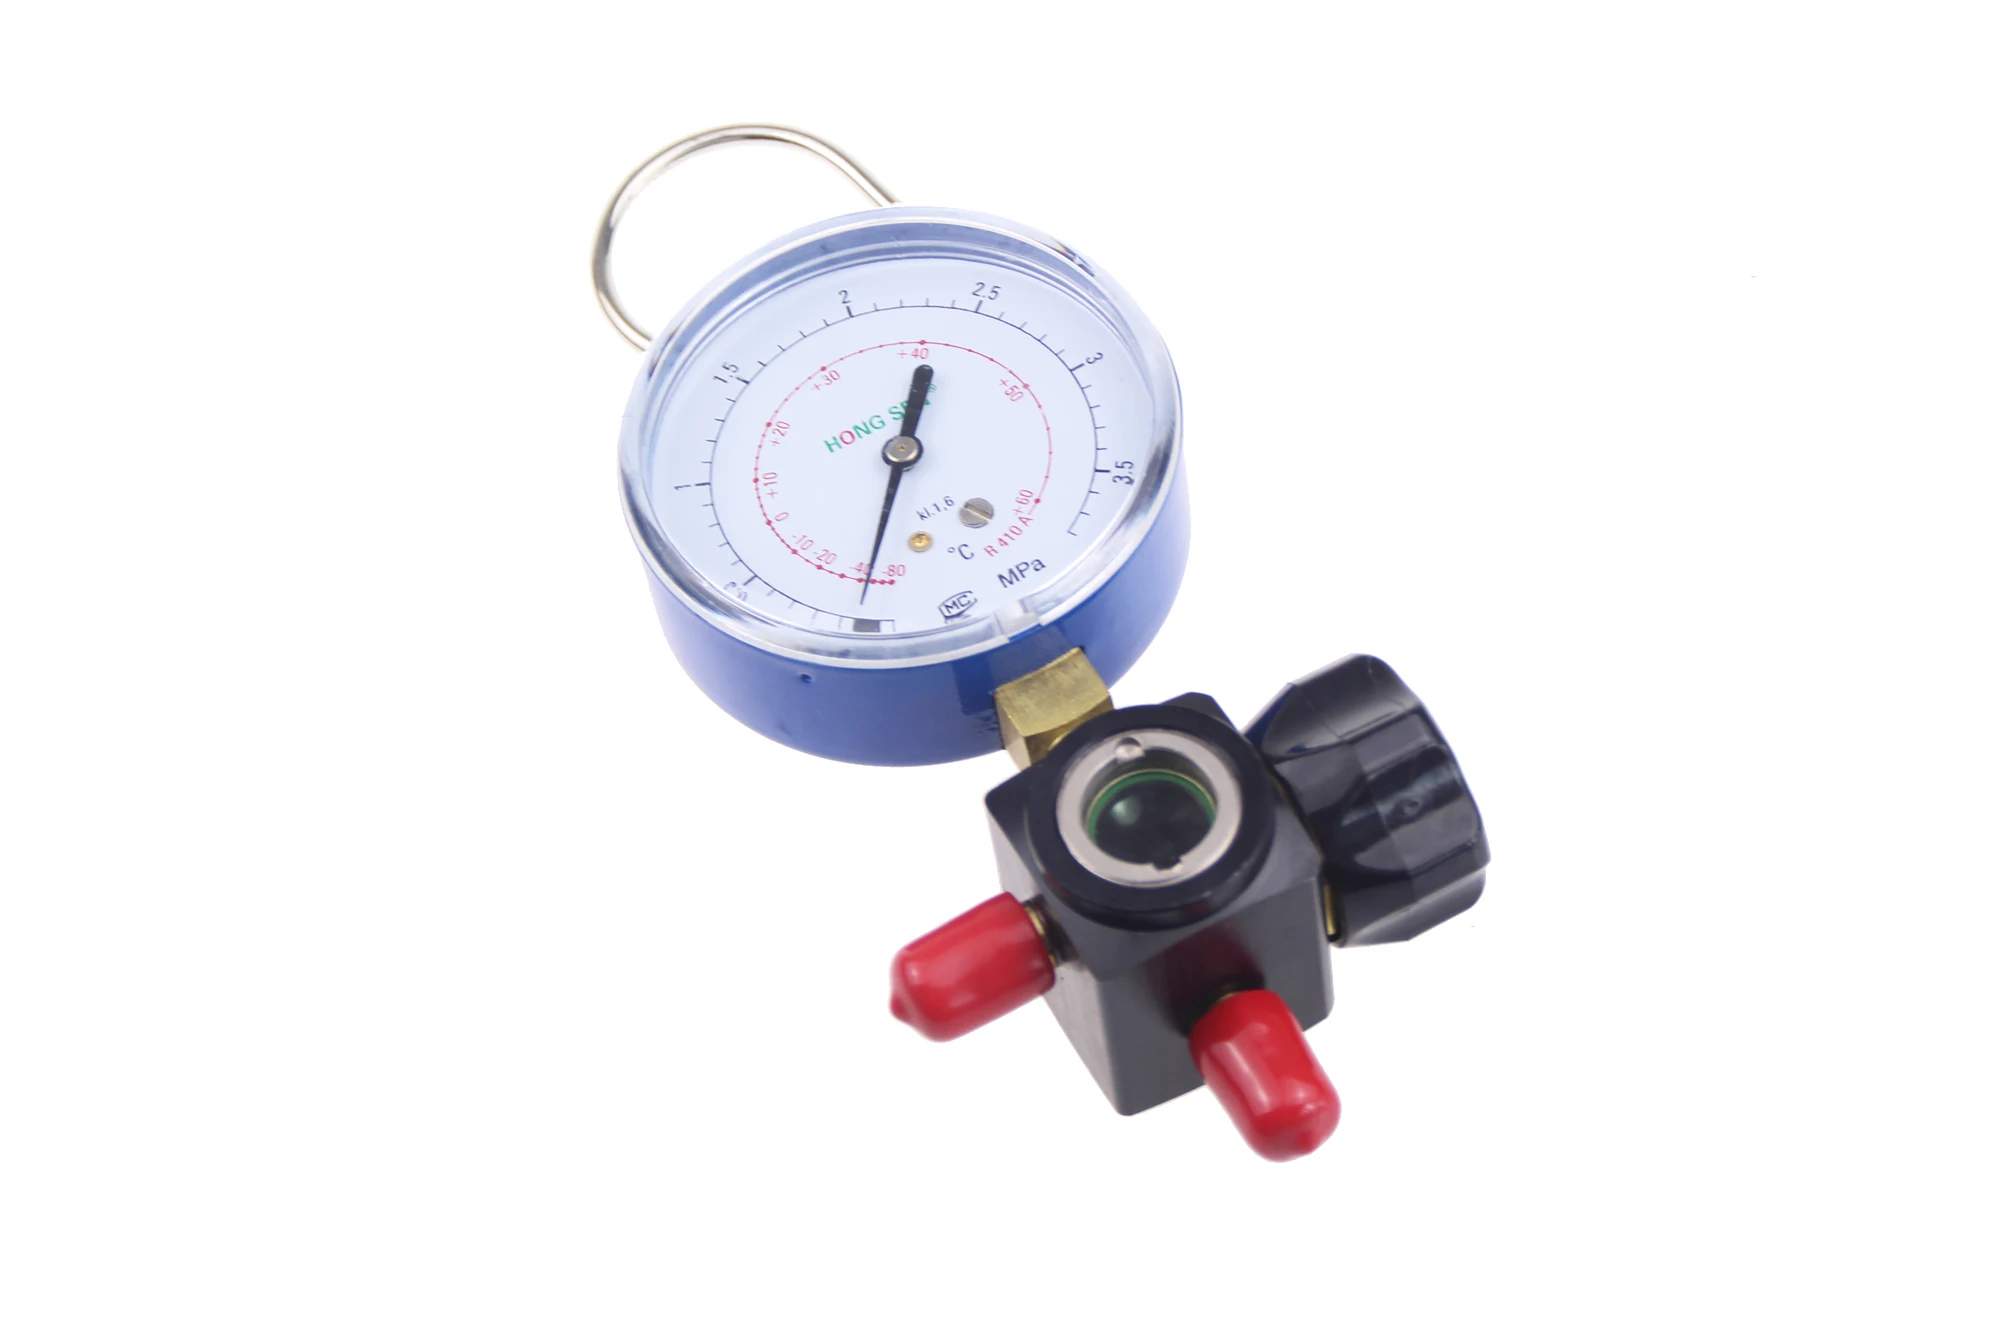 Hvac 1-way Manifold gauge HS-470A-R410 Single Gauge For R410 With 2pcs low Pressure Hose Free shipping